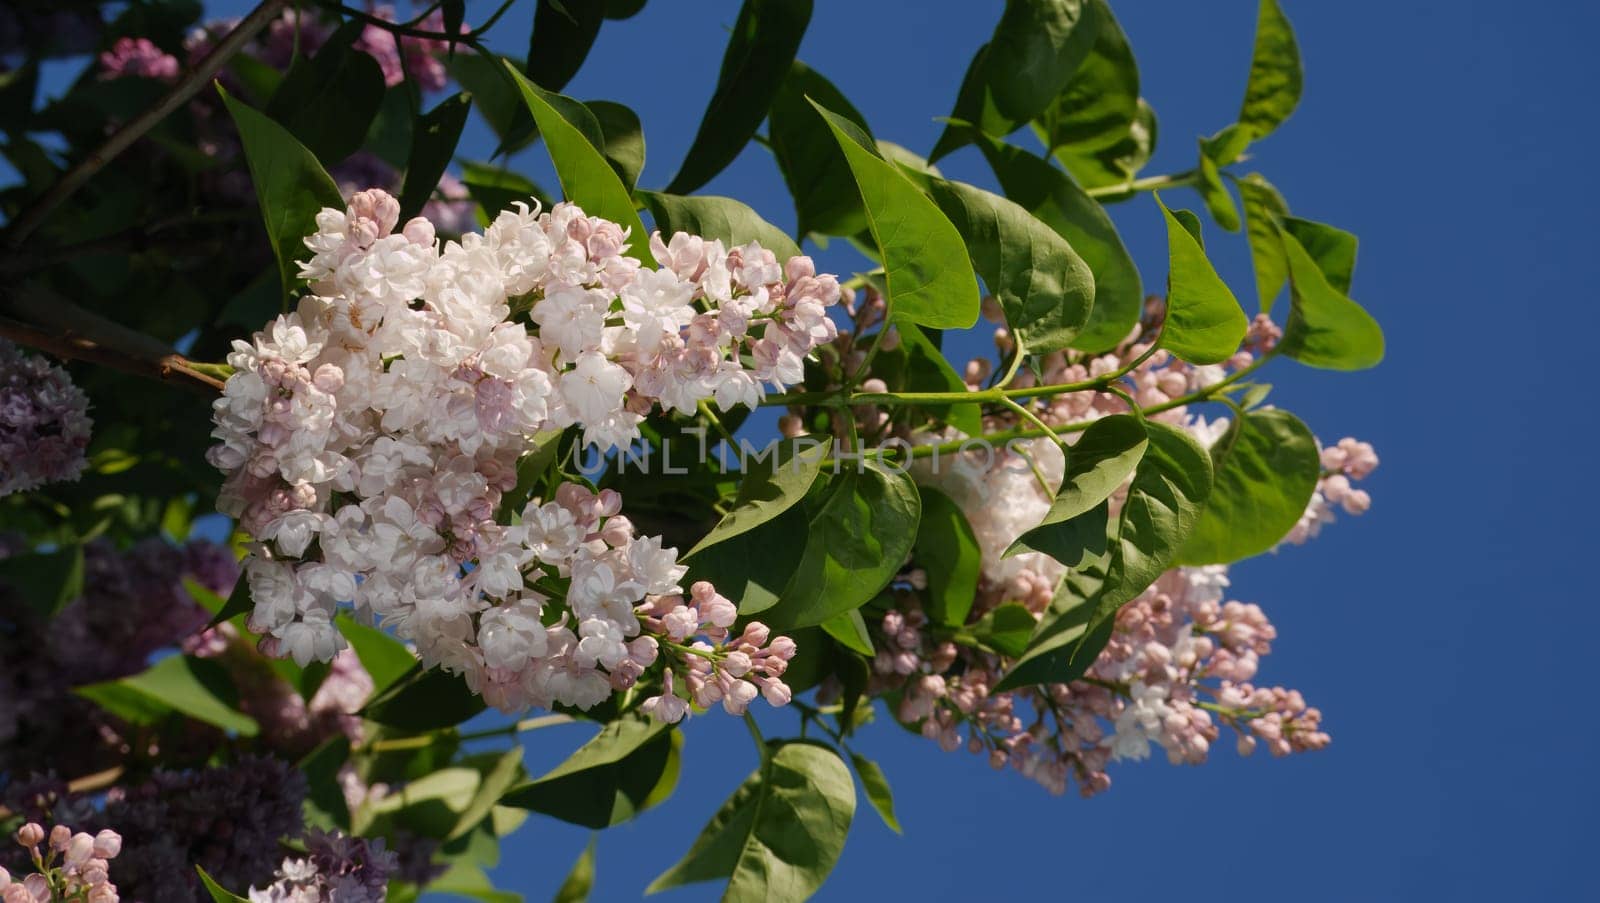 White Lilac shrub flowers blooming in spring garden. Common lilac Syringa vulgaris bush. Close-up with soft focus of a branch on a lilac tree. color nature by lempro